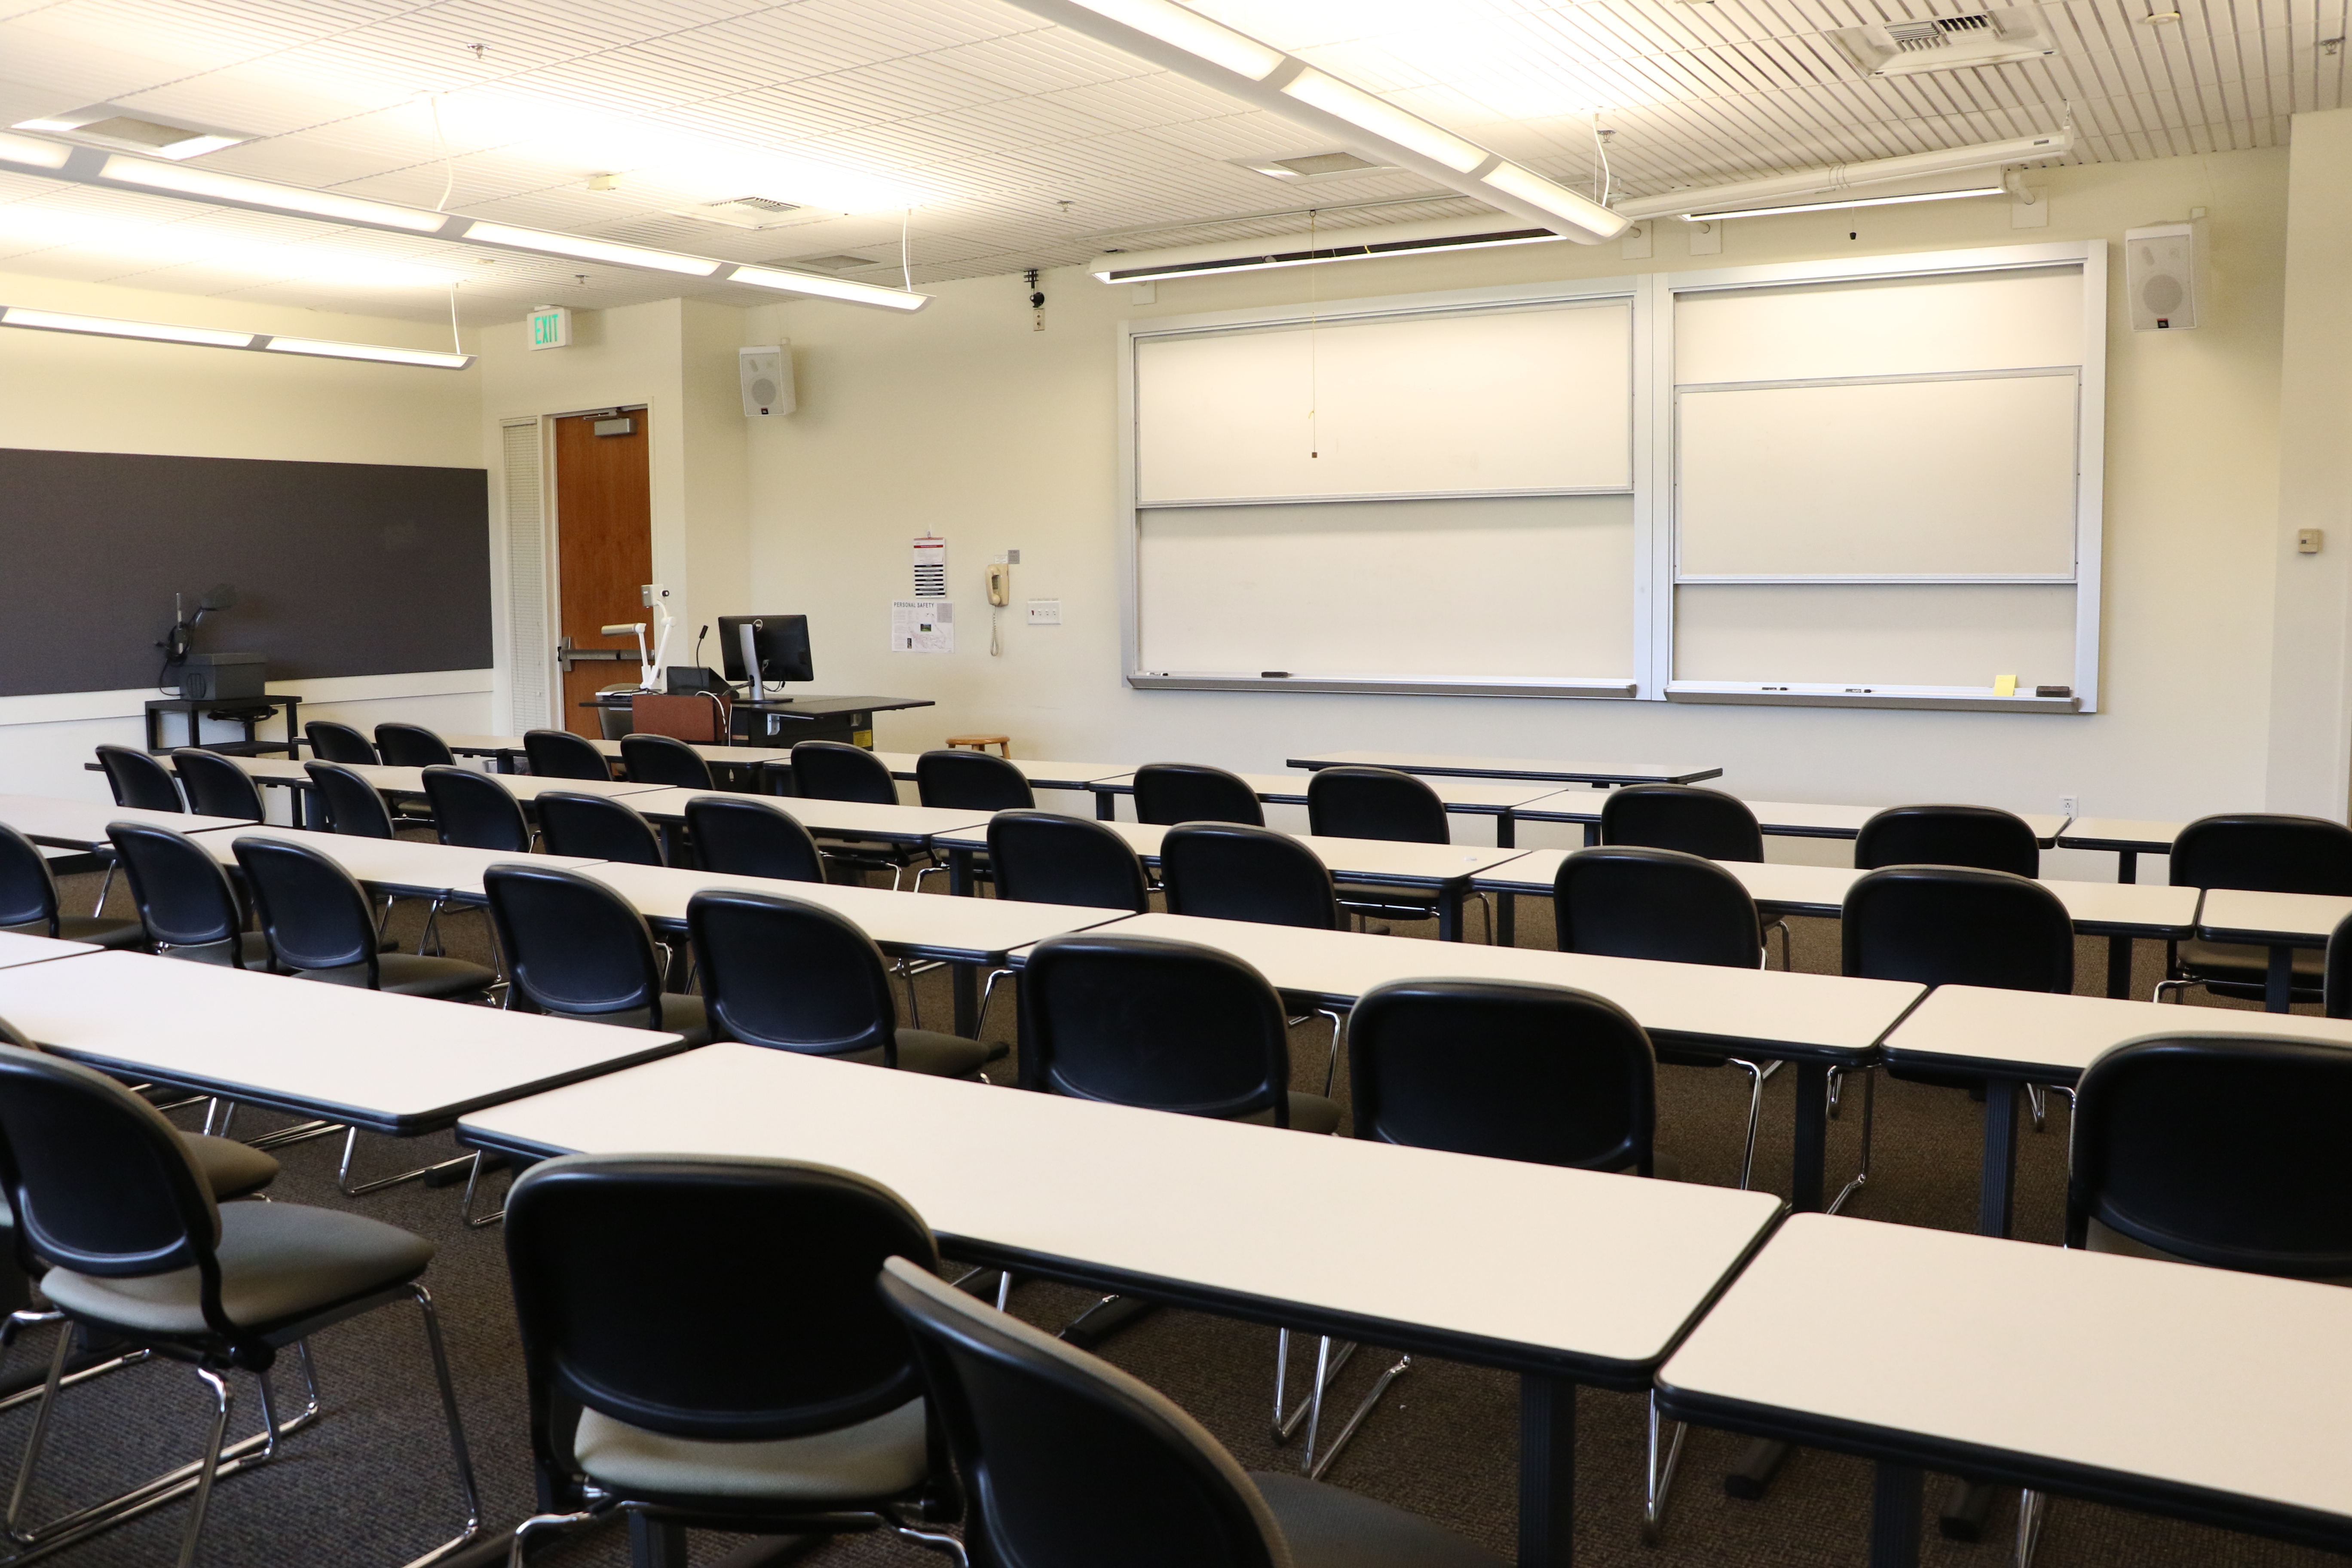 Room Consists of carpet floors, moveable tables and chairs, a white board and podium are both located at the front of the room.